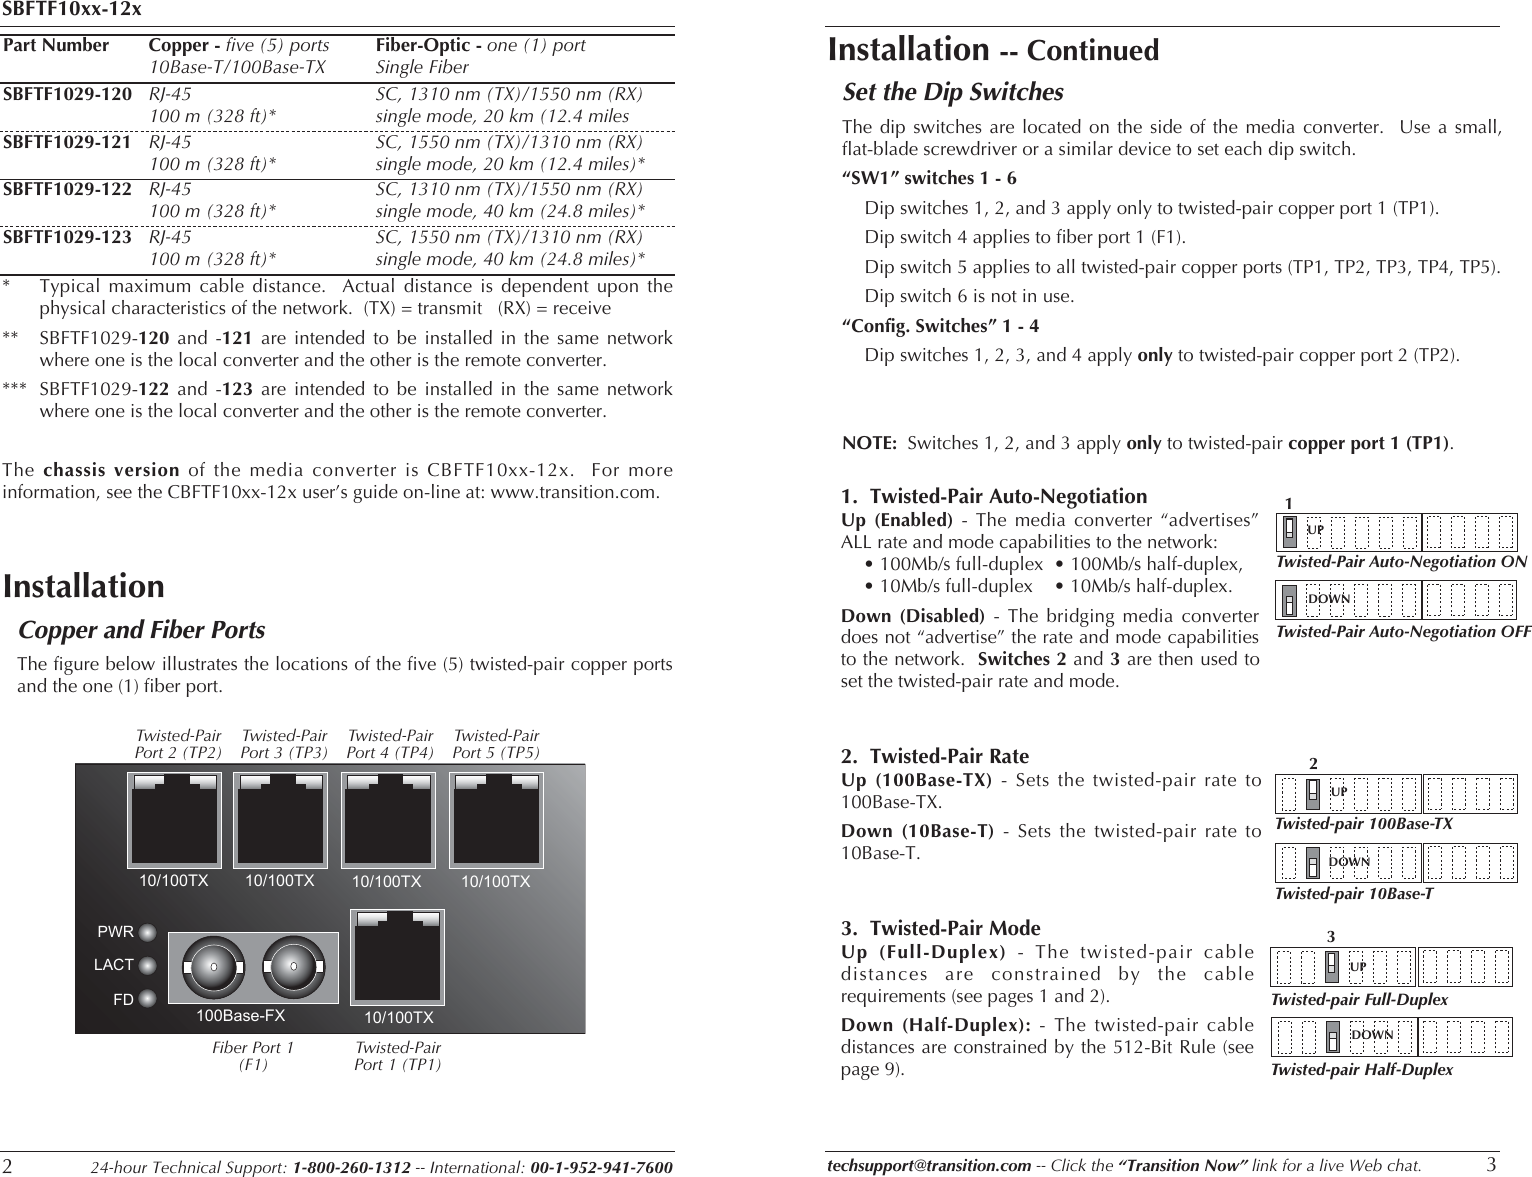 Page 2 of 9 - Transition-Networks Transition-Networks-Sbftf1011-120-Users-Manual- 16-page (8 Sheet) Web  Transition-networks-sbftf1011-120-users-manual